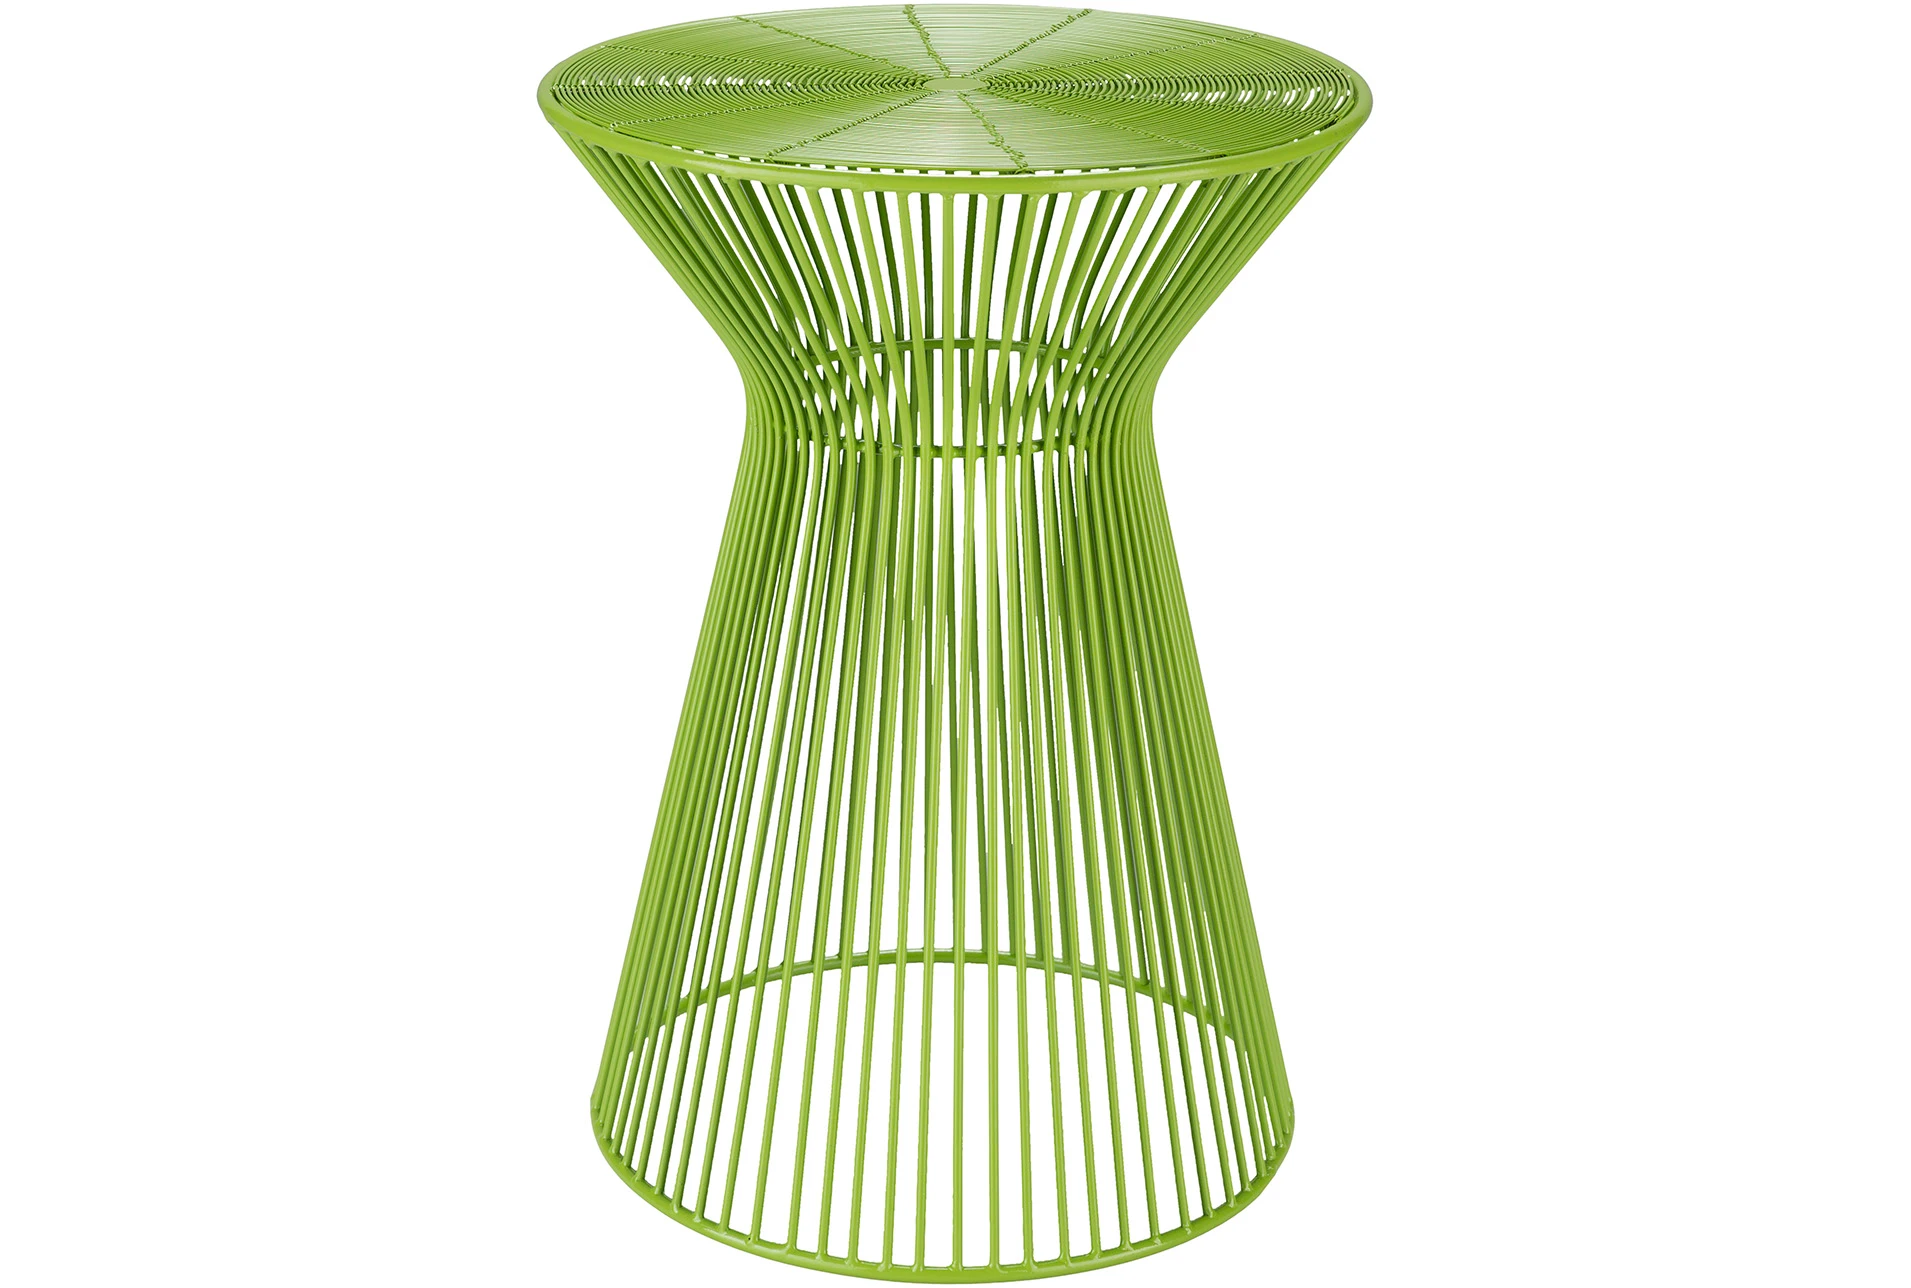 Lime Metal Stool with Vibrant Green Color